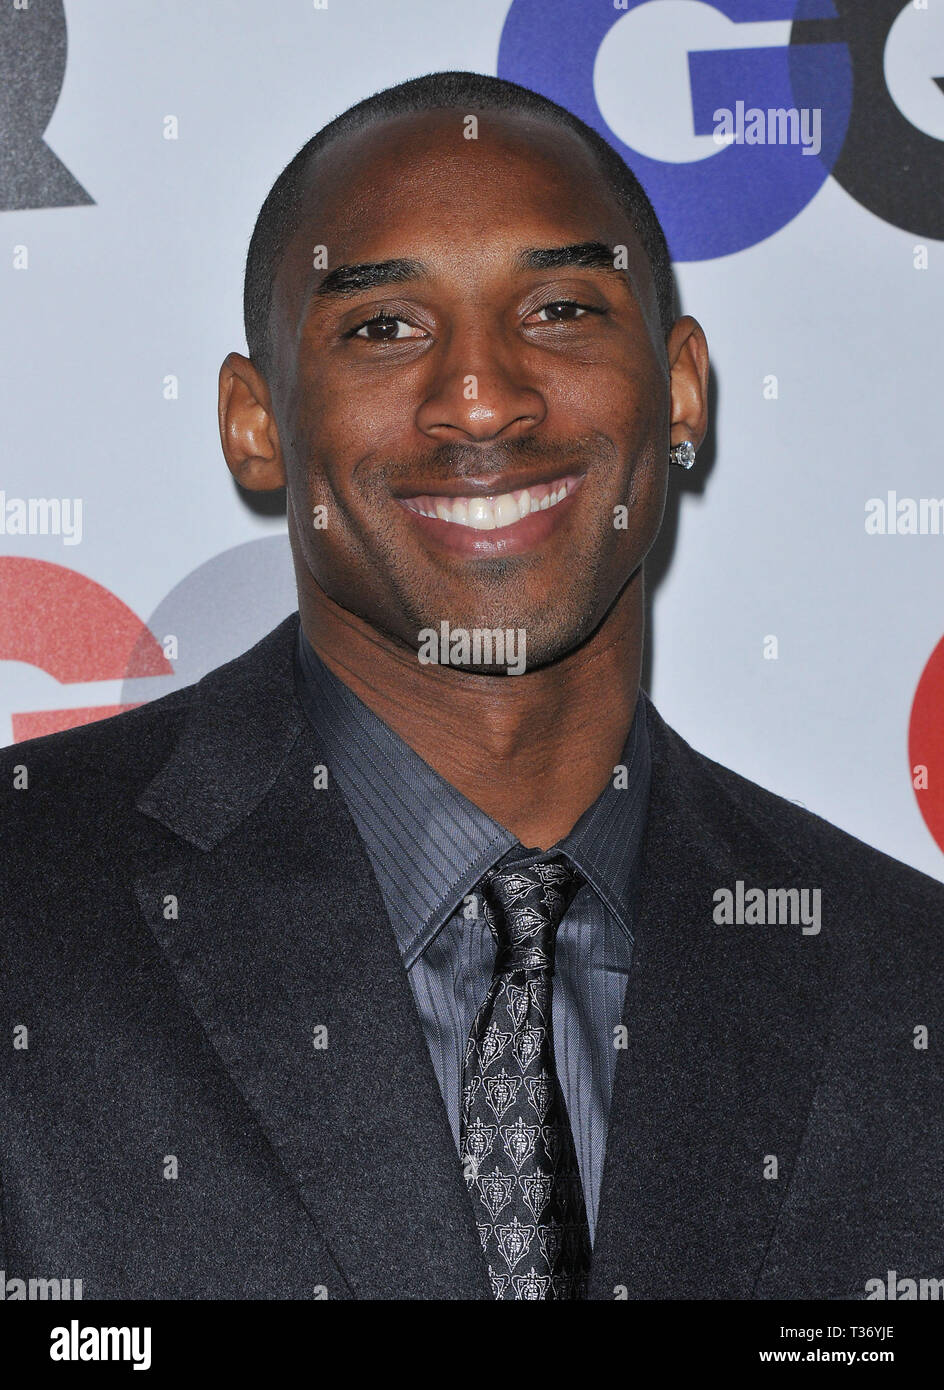 Kobe Bryant - 2009 GQ Men of The Year Party at the Chateau Marmont